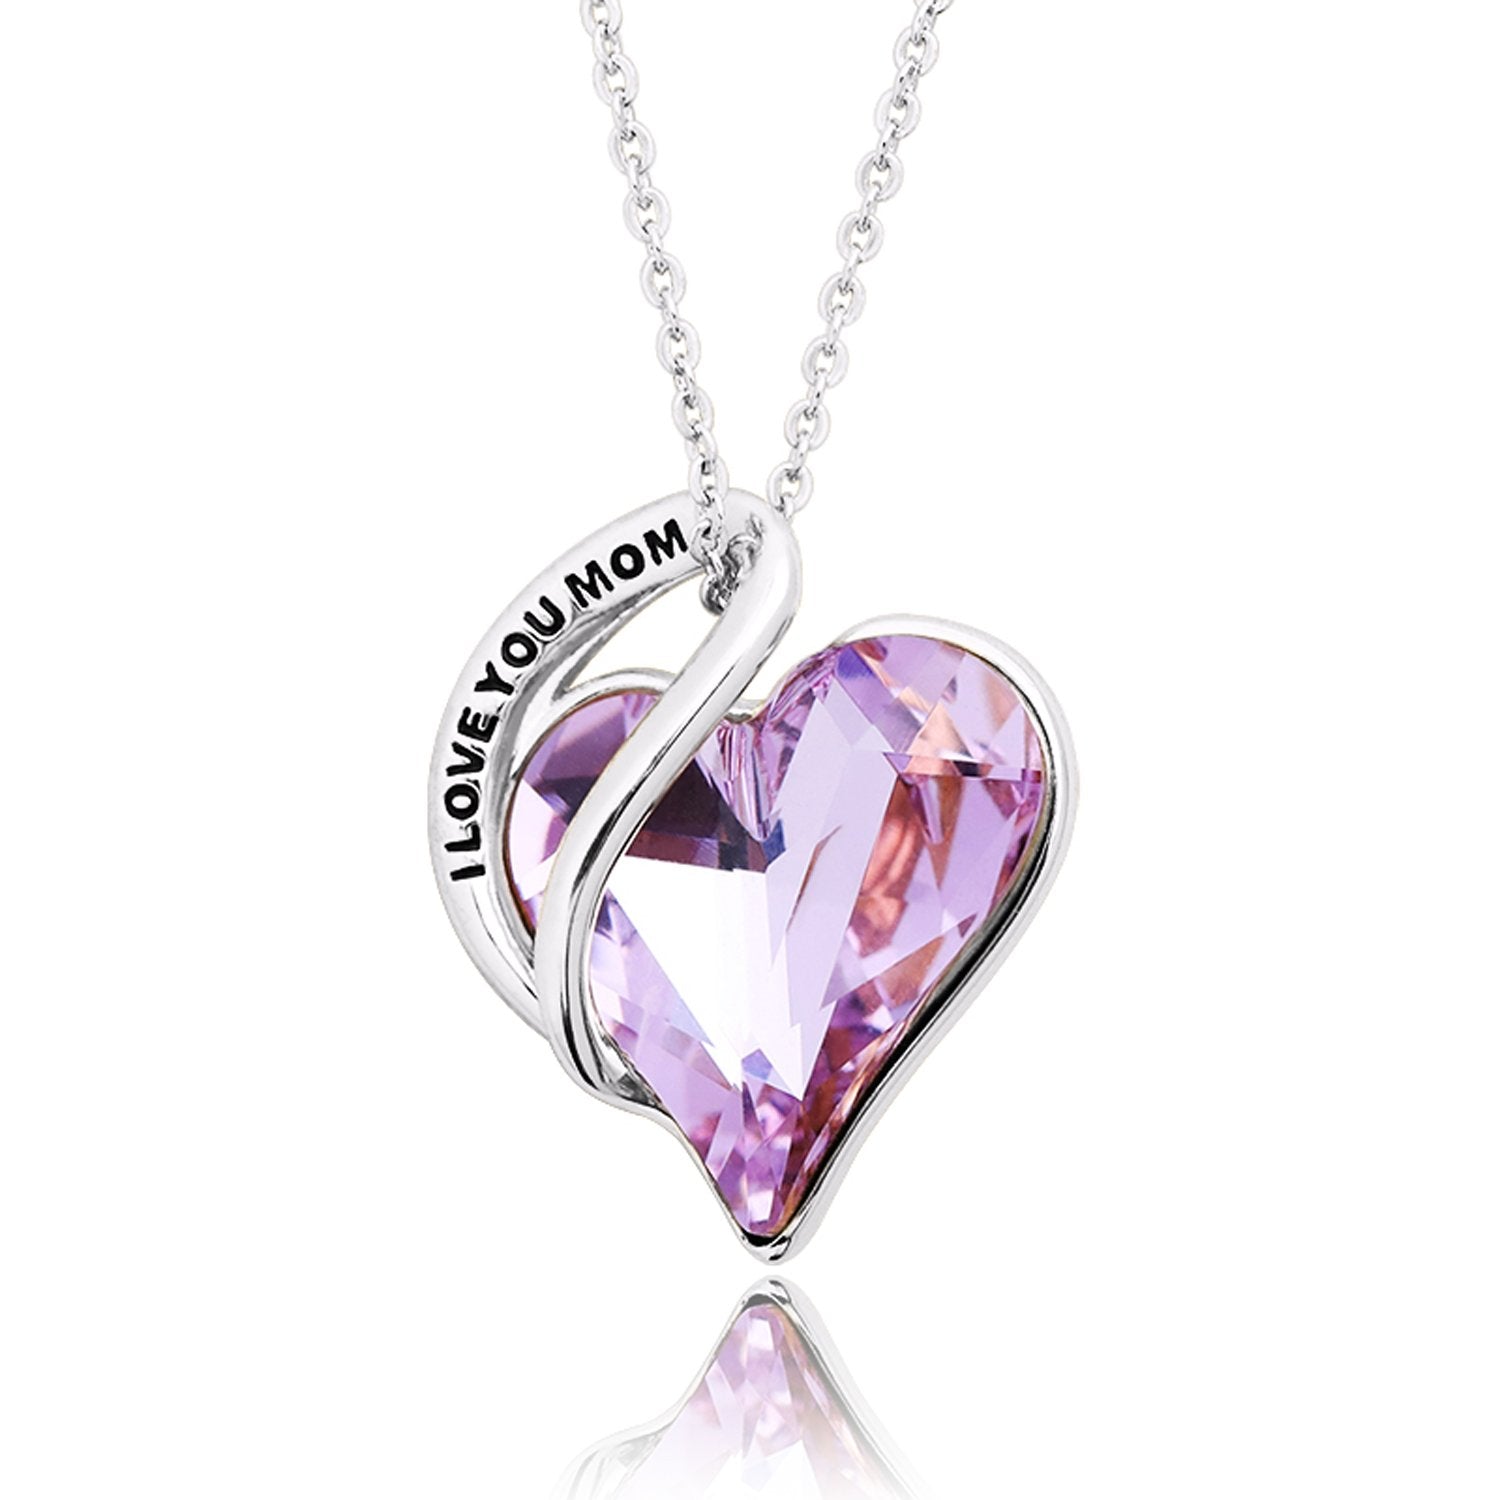 S925 sterling silver Exquisite and elegant "I LOVE MOM" necklace